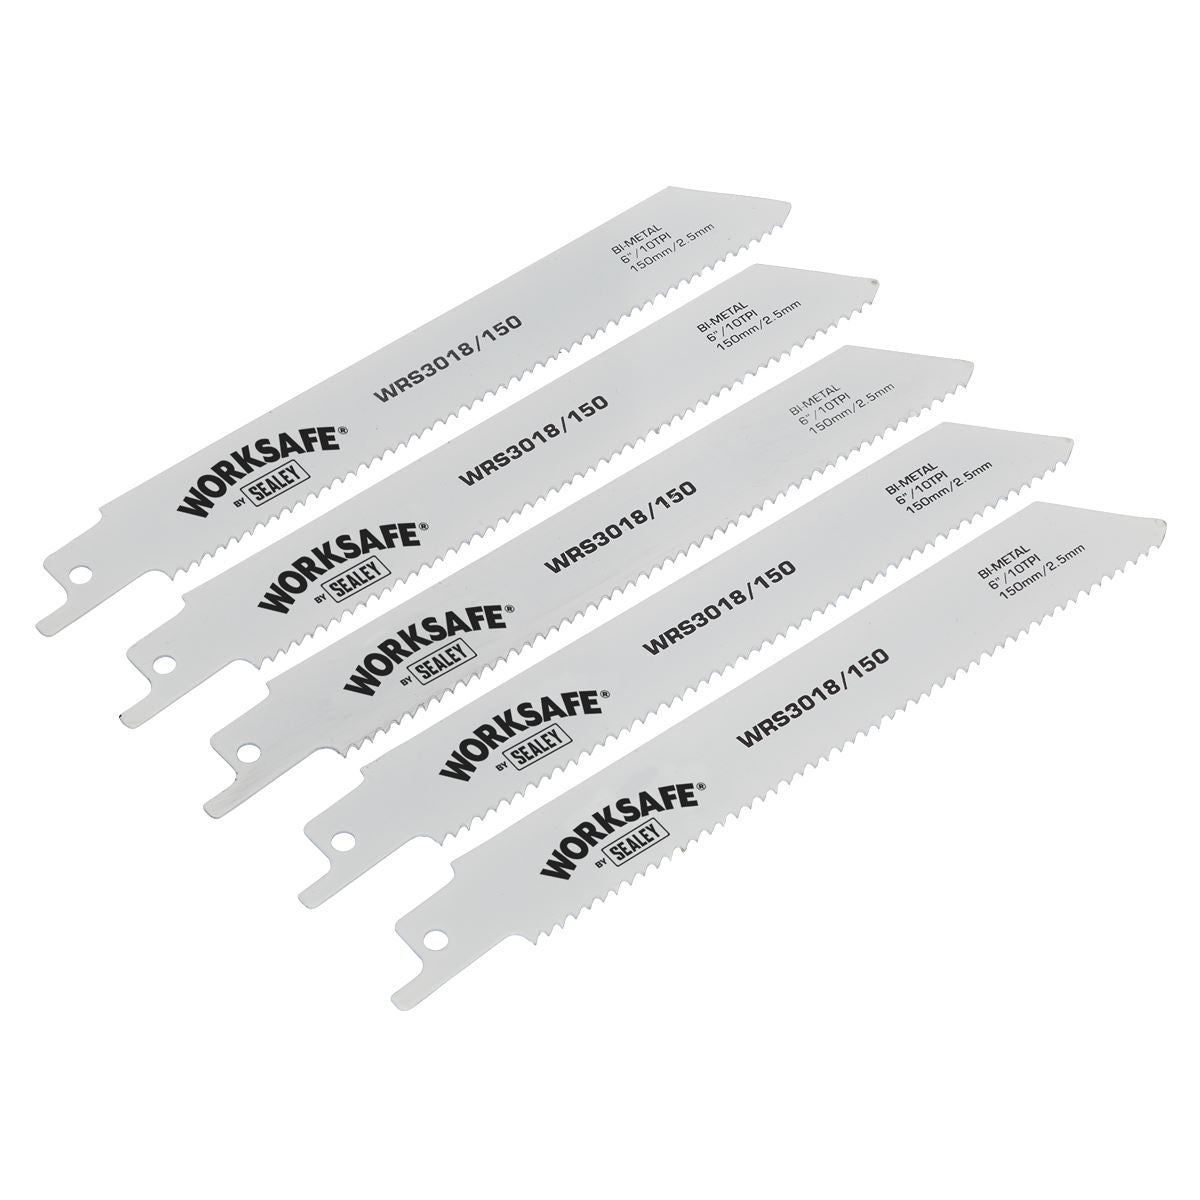 Worksafe by Sealey Reciprocating Saw Blade 150mm 10tpi - Pack of 5